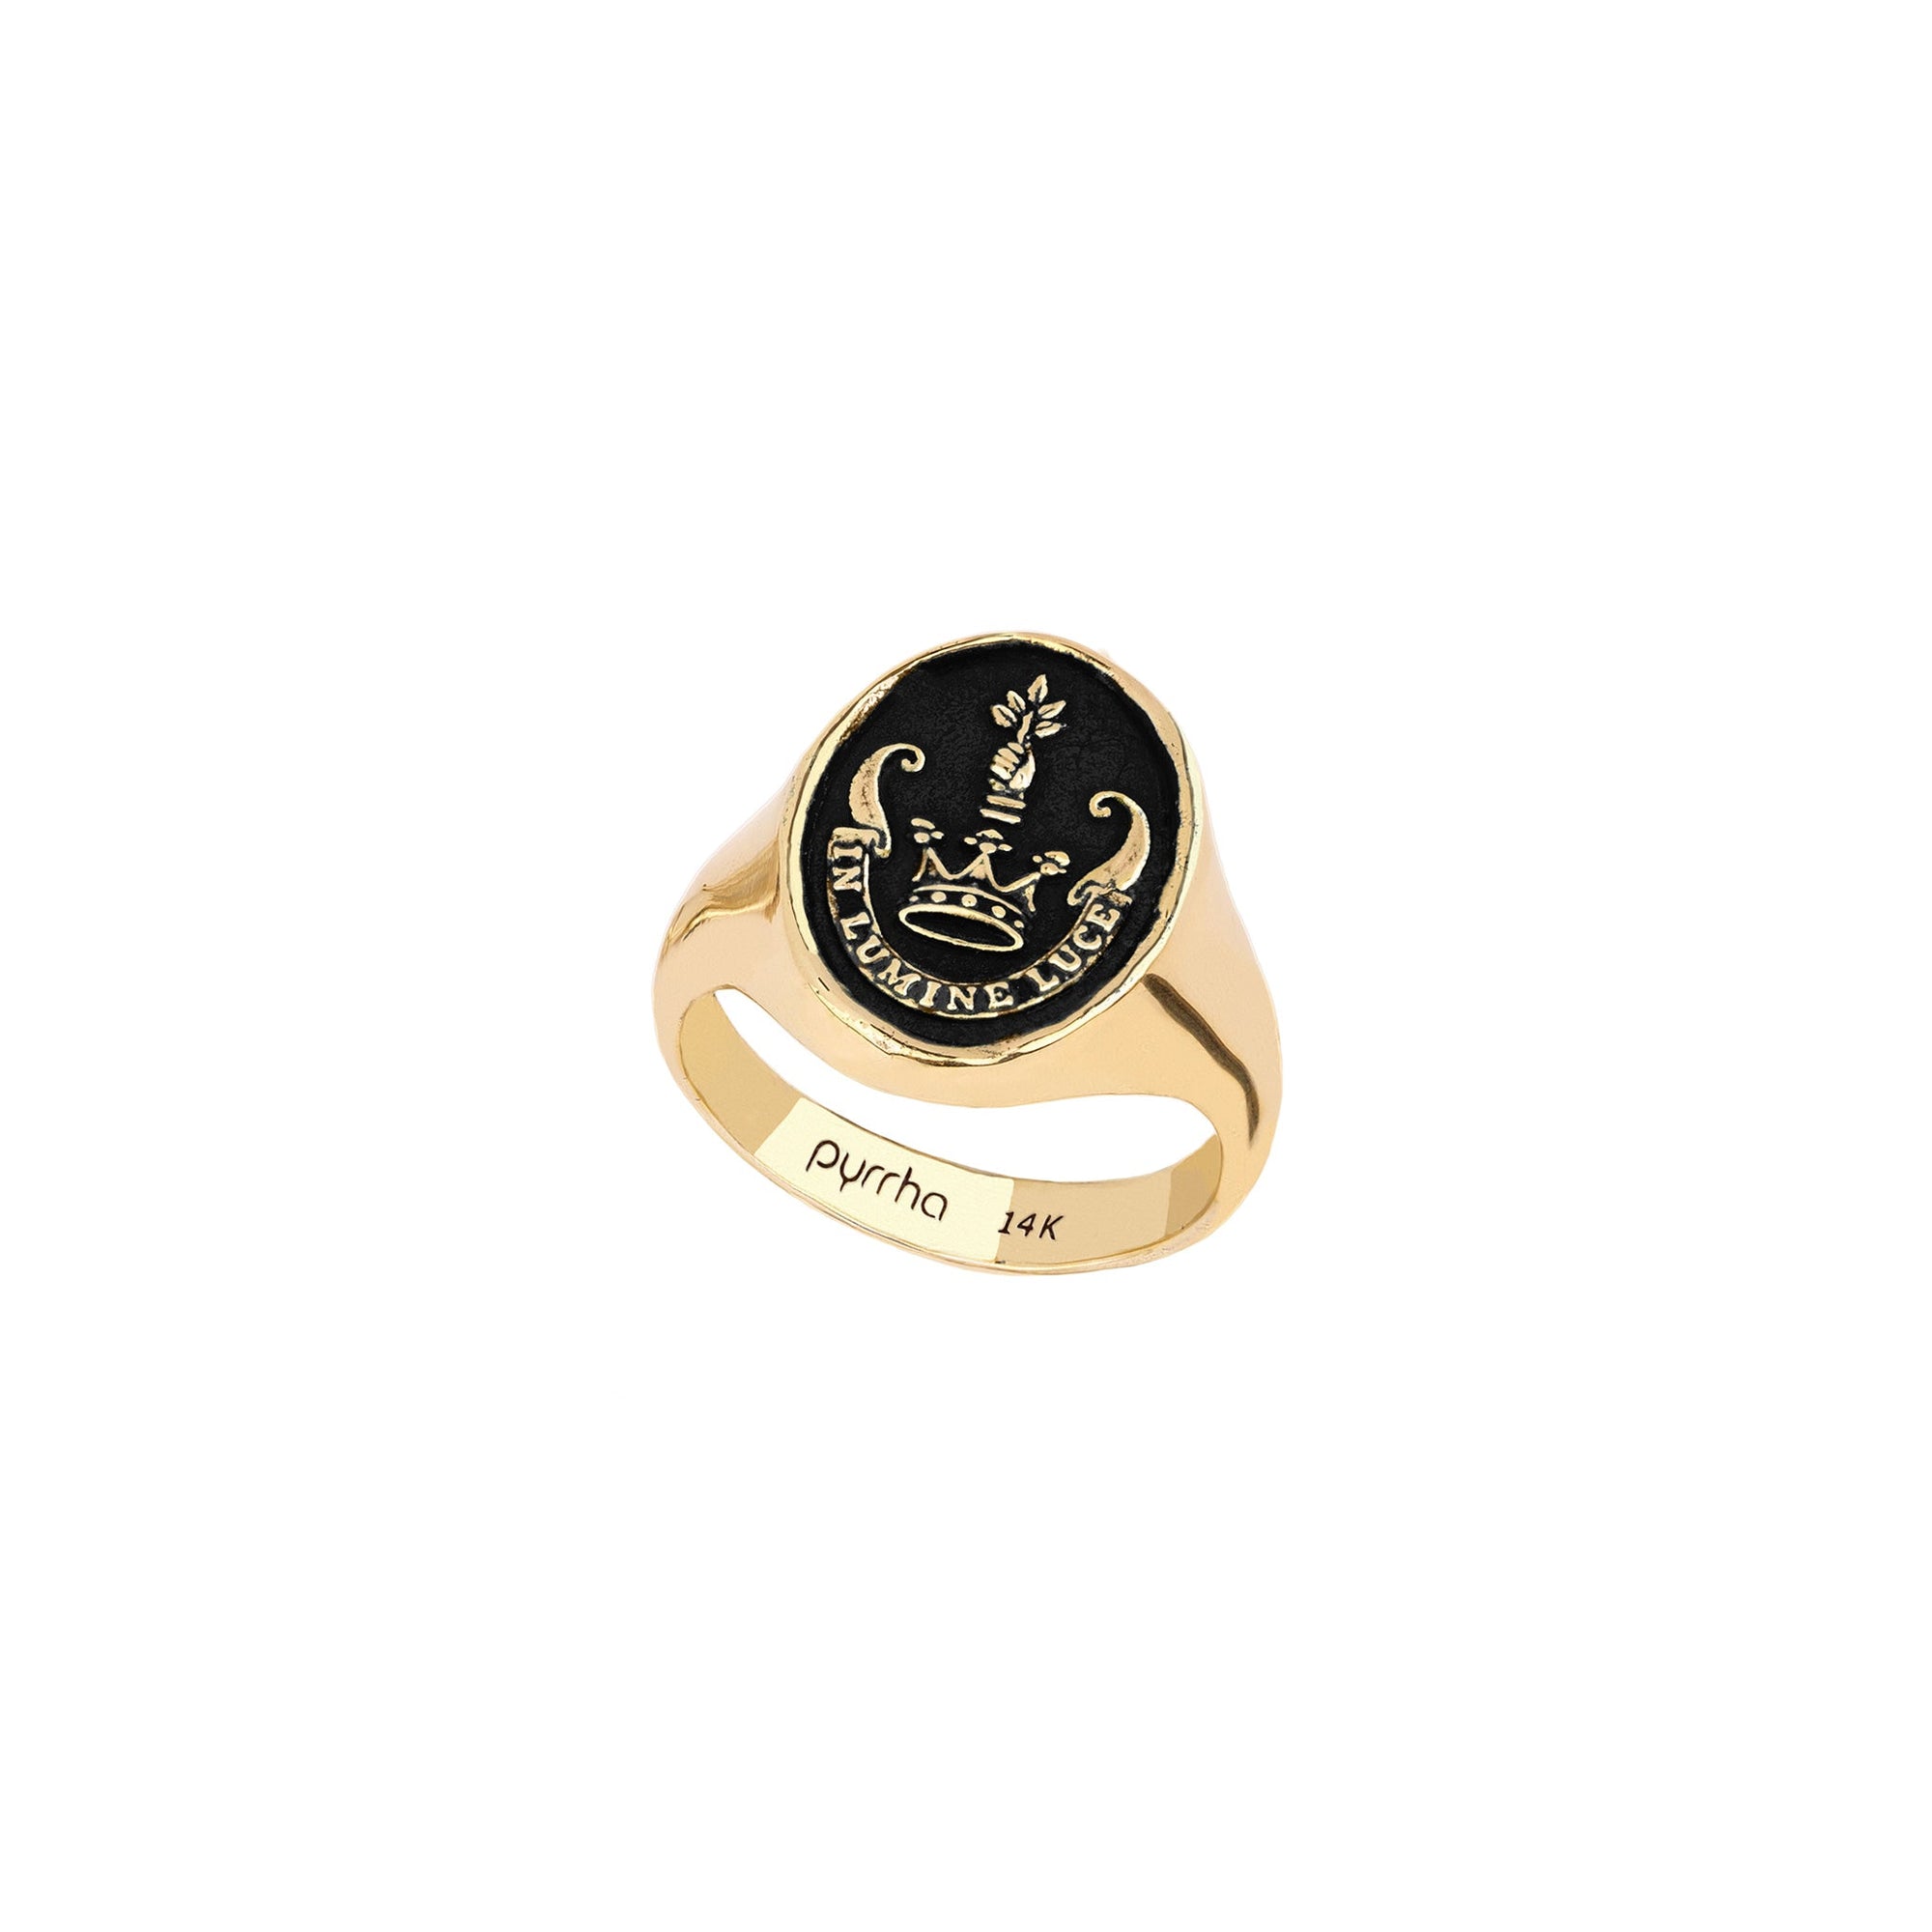 A 14 karat gold ring with our Inspiration signet pictured on the top.